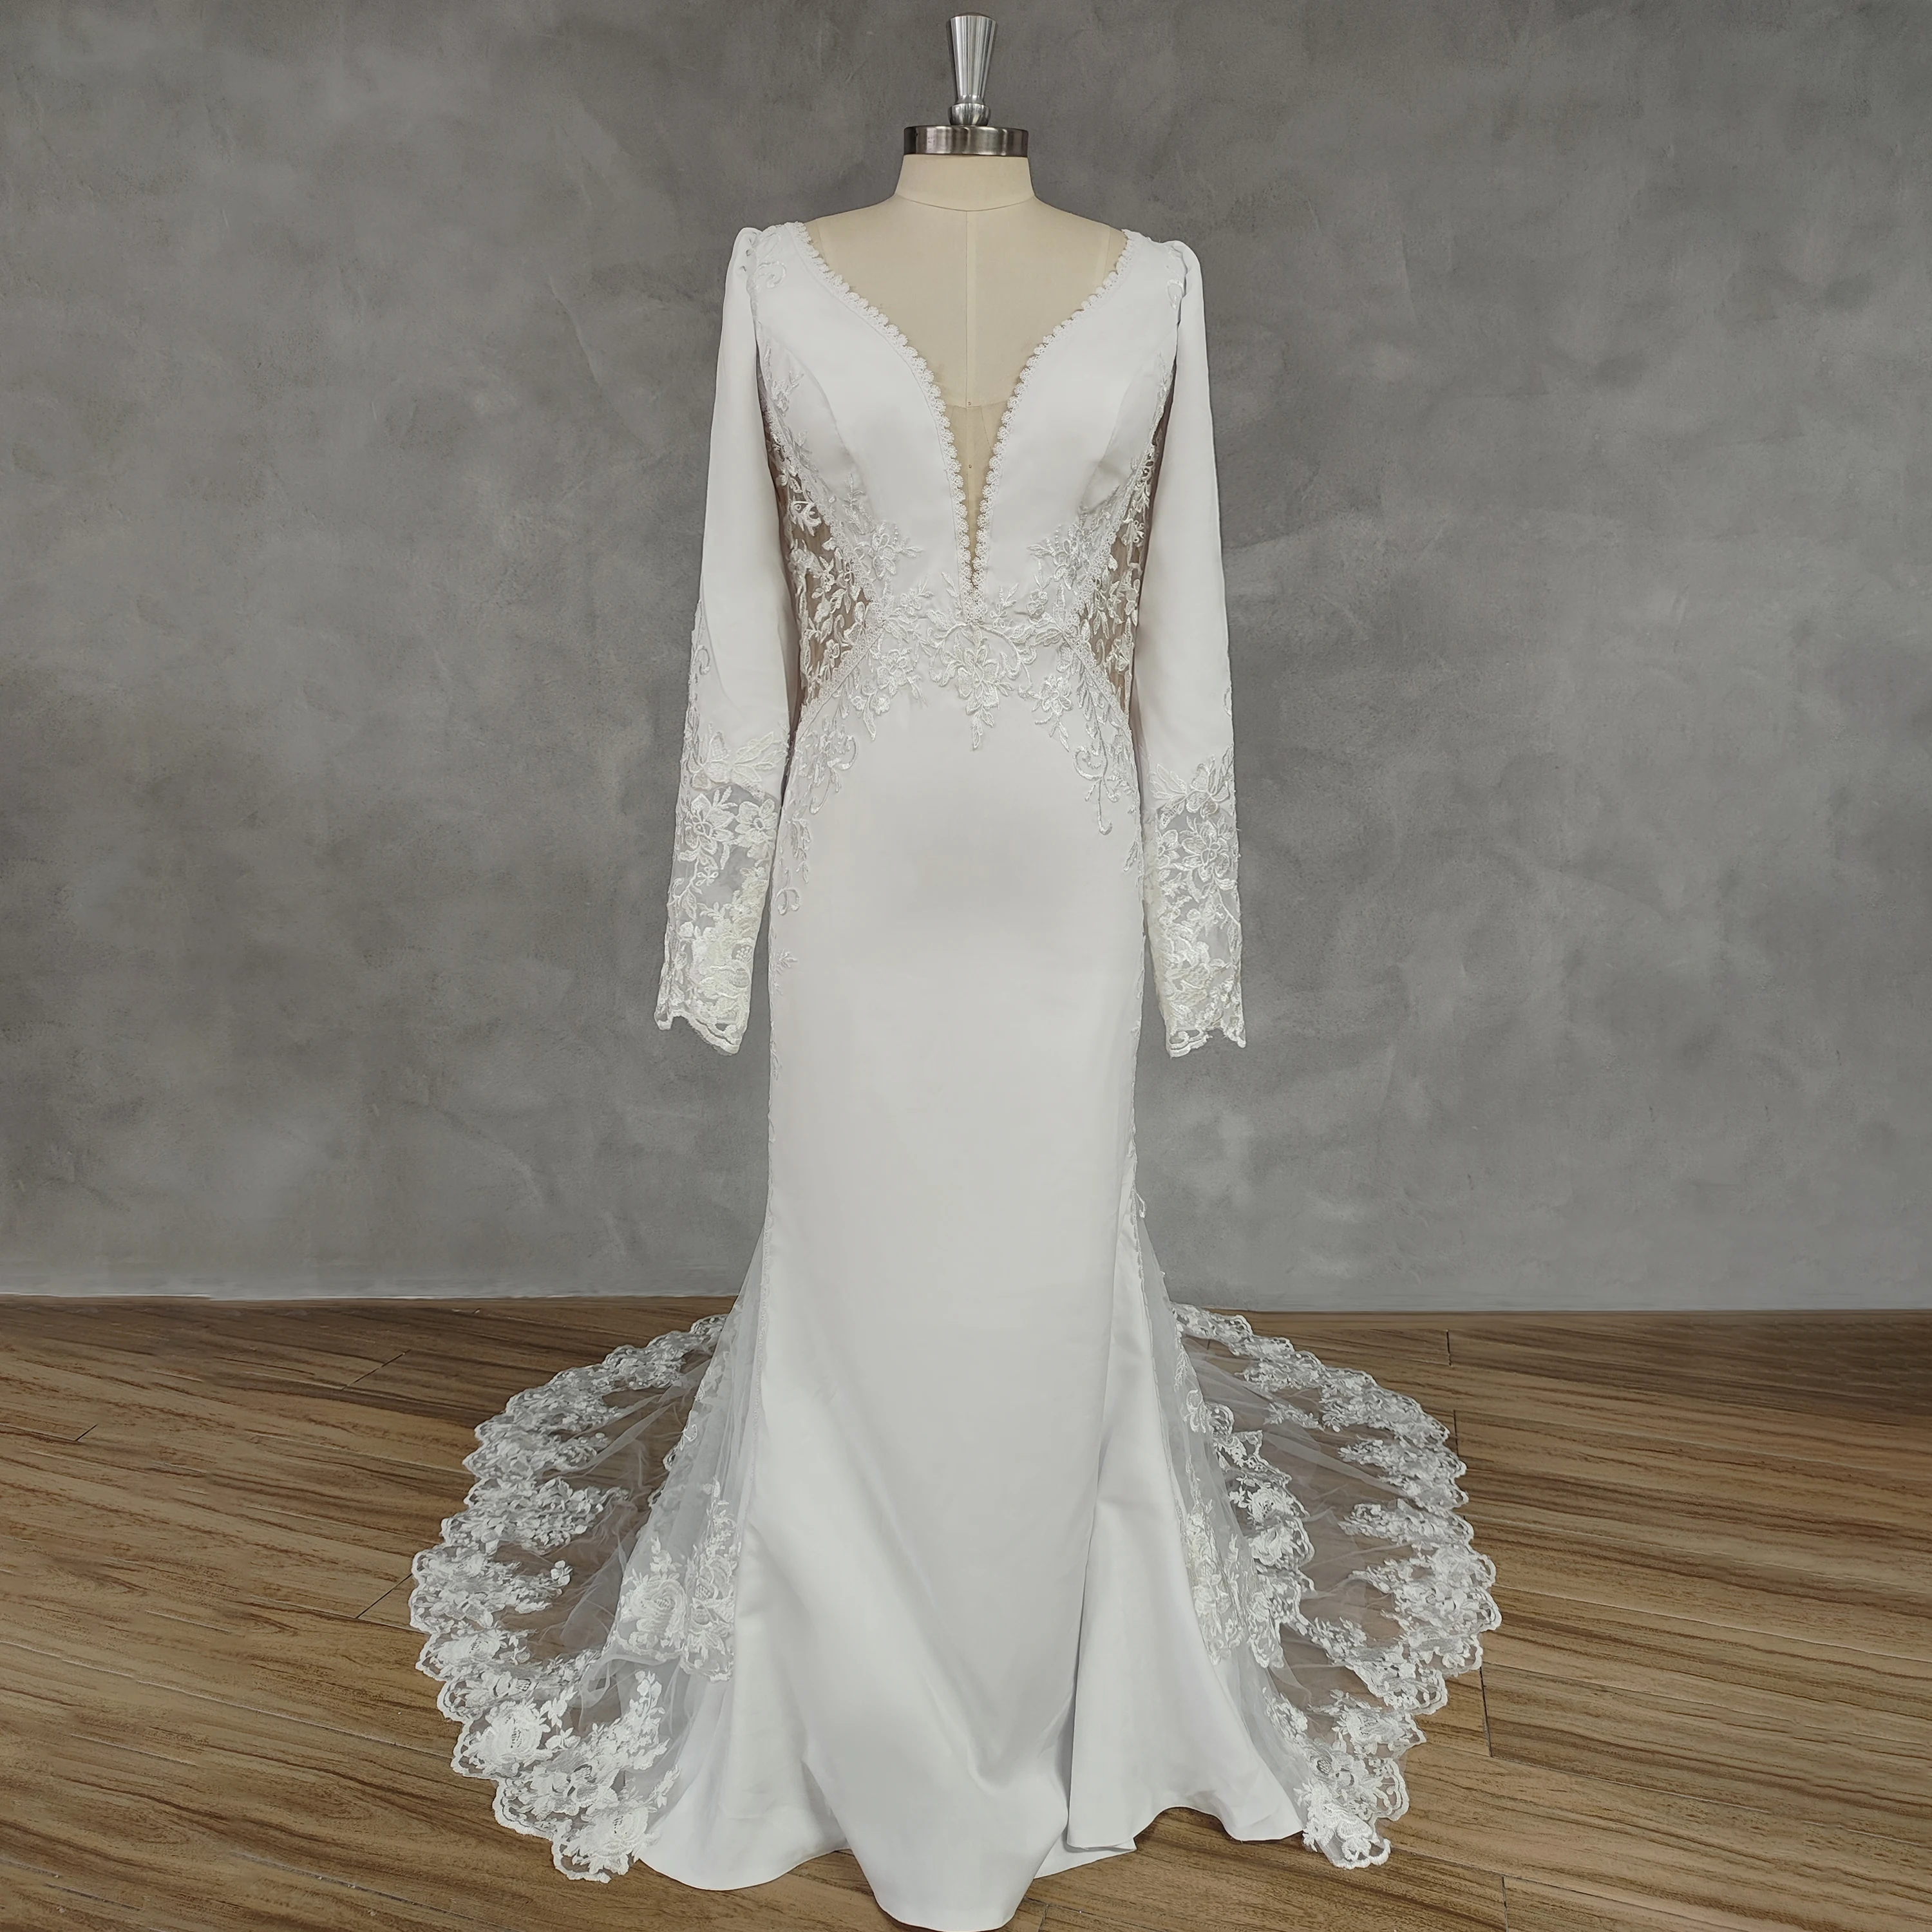 

DIDEYTTAWL Real Picture V-Neck Long Sleeves Lace Mermaid Wedding Dress For Women Elegant Illusion Back Court Train Bridal Gown